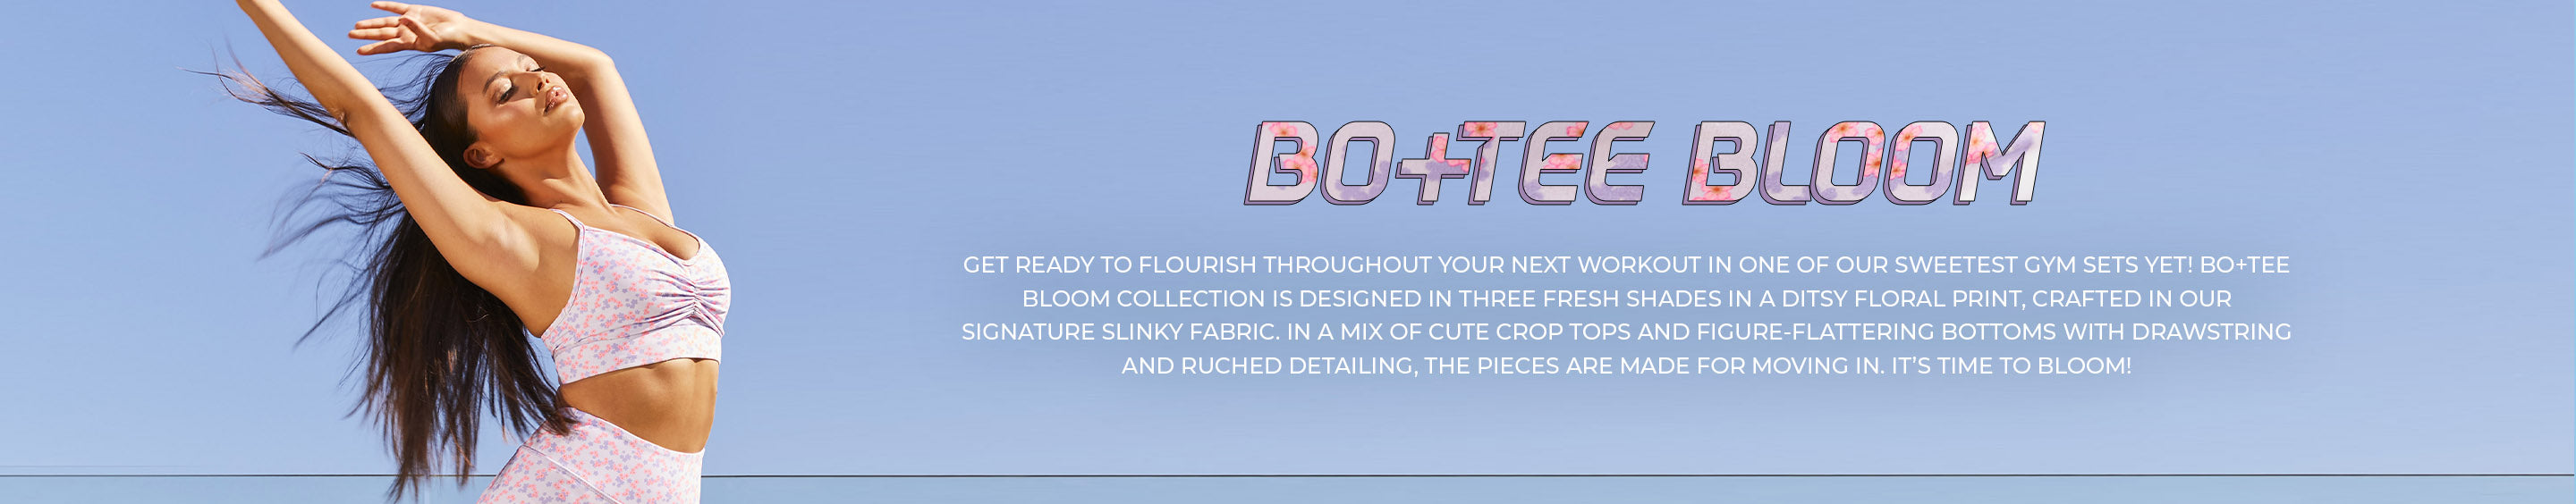 Bo+Tee Bloom Collection banner